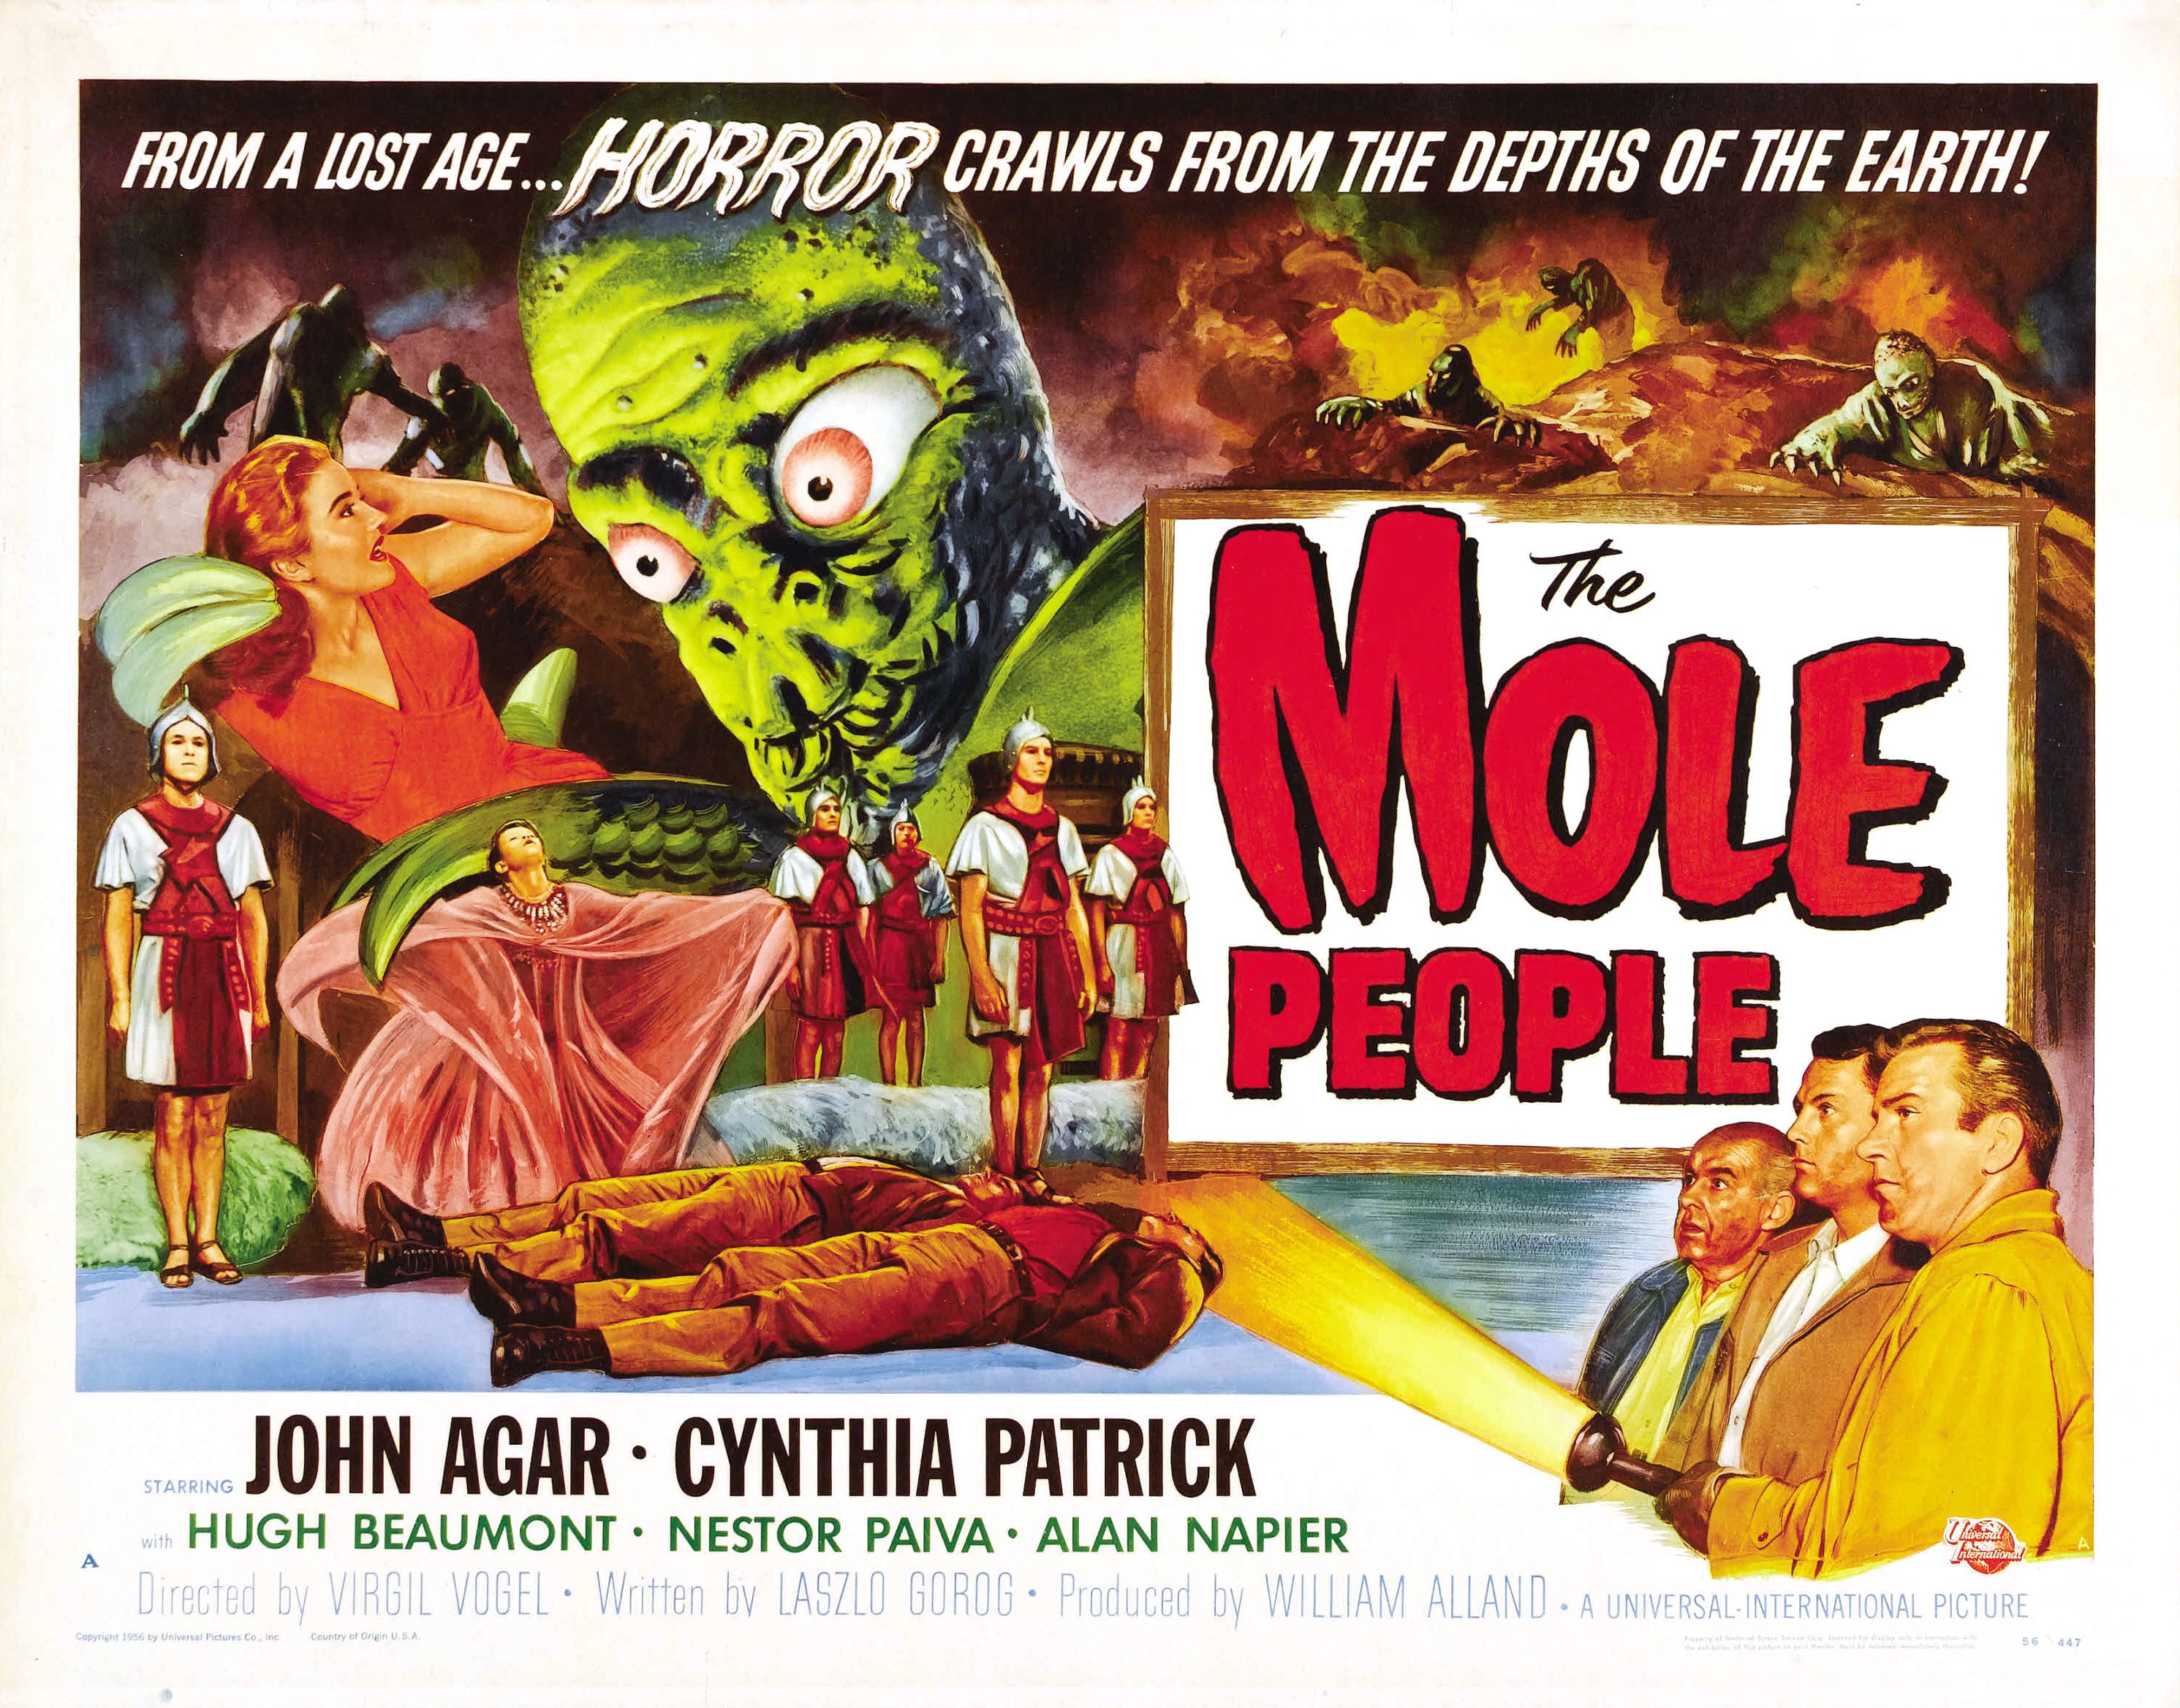 Old Retro Horror Film Posters - The Mole People